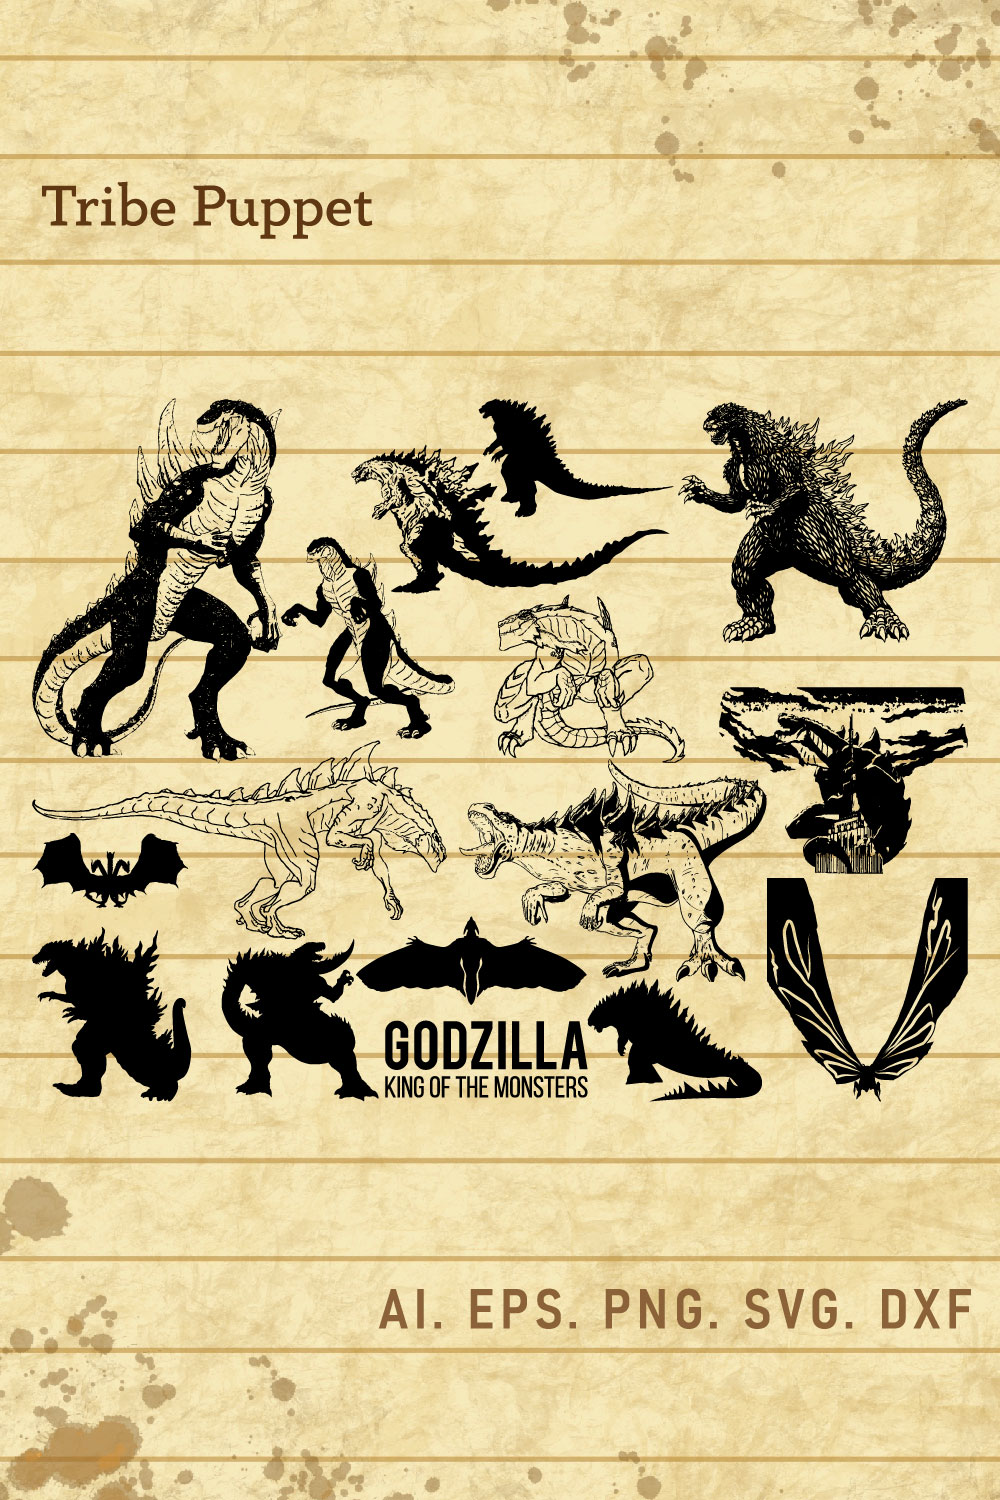 Bunch of different types of dinosaurs on a piece of paper.